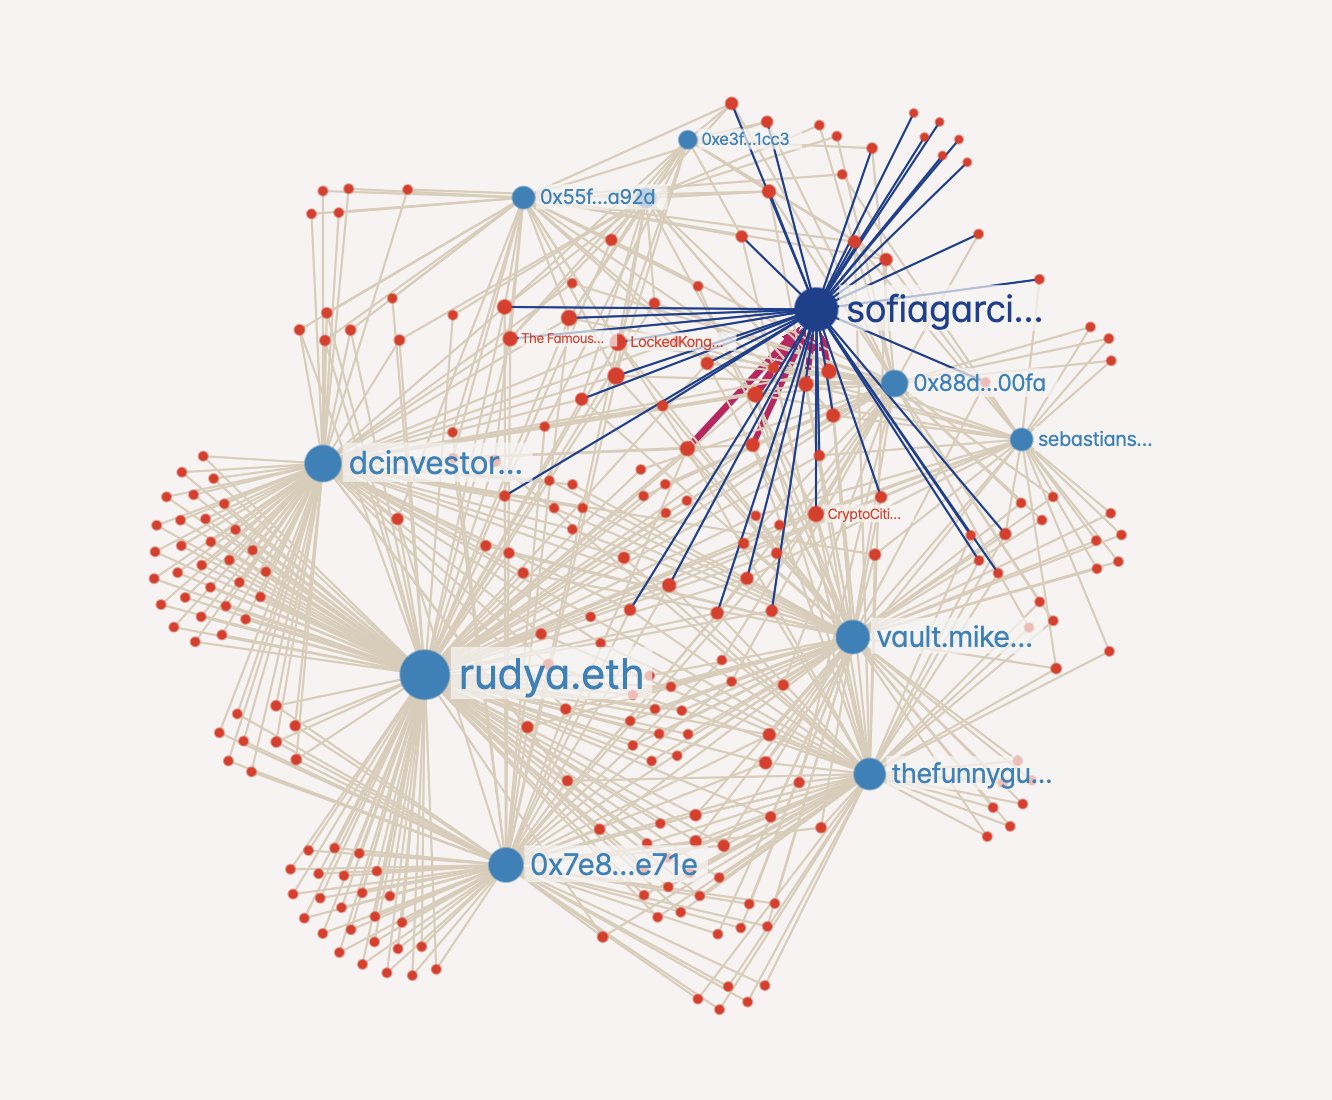 A diagram mapping connections between Ethereum wallets with nodes and rays, rendered in cream, blue, and red